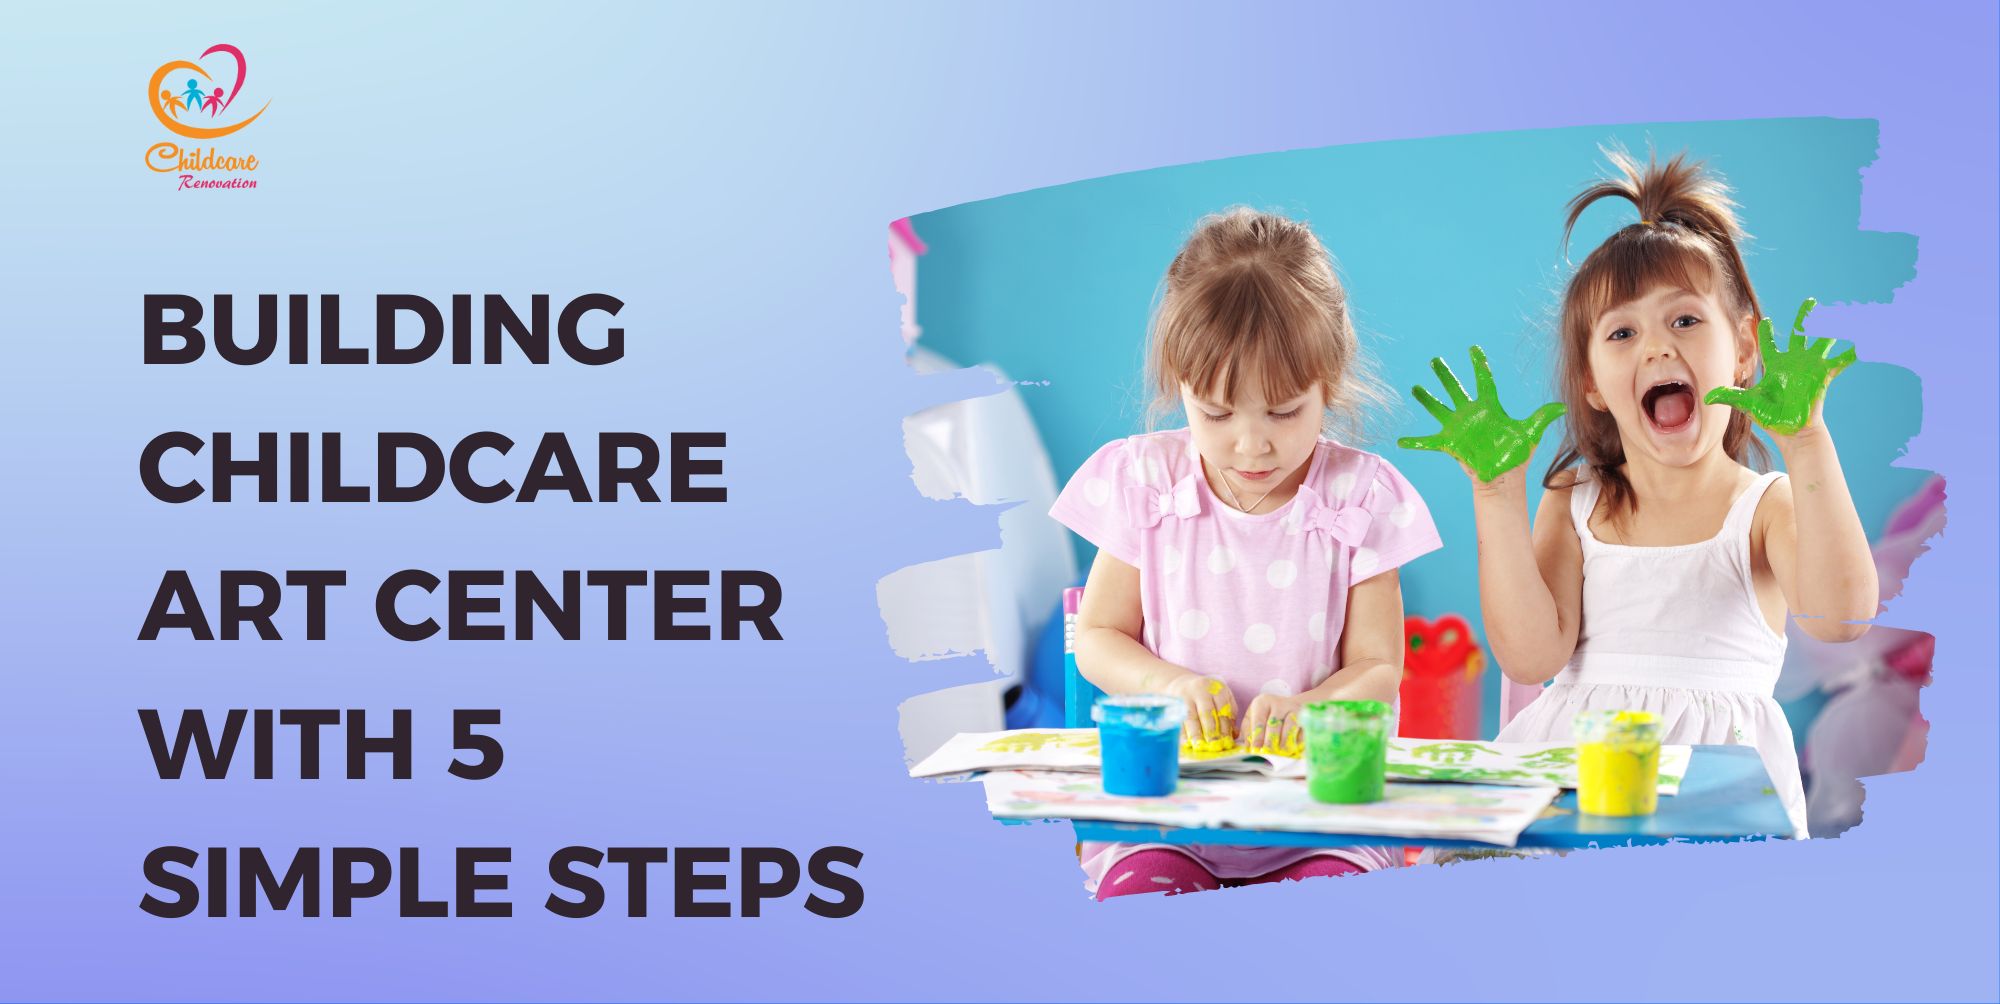 Building Childcare Art Center With 5 Simple Steps